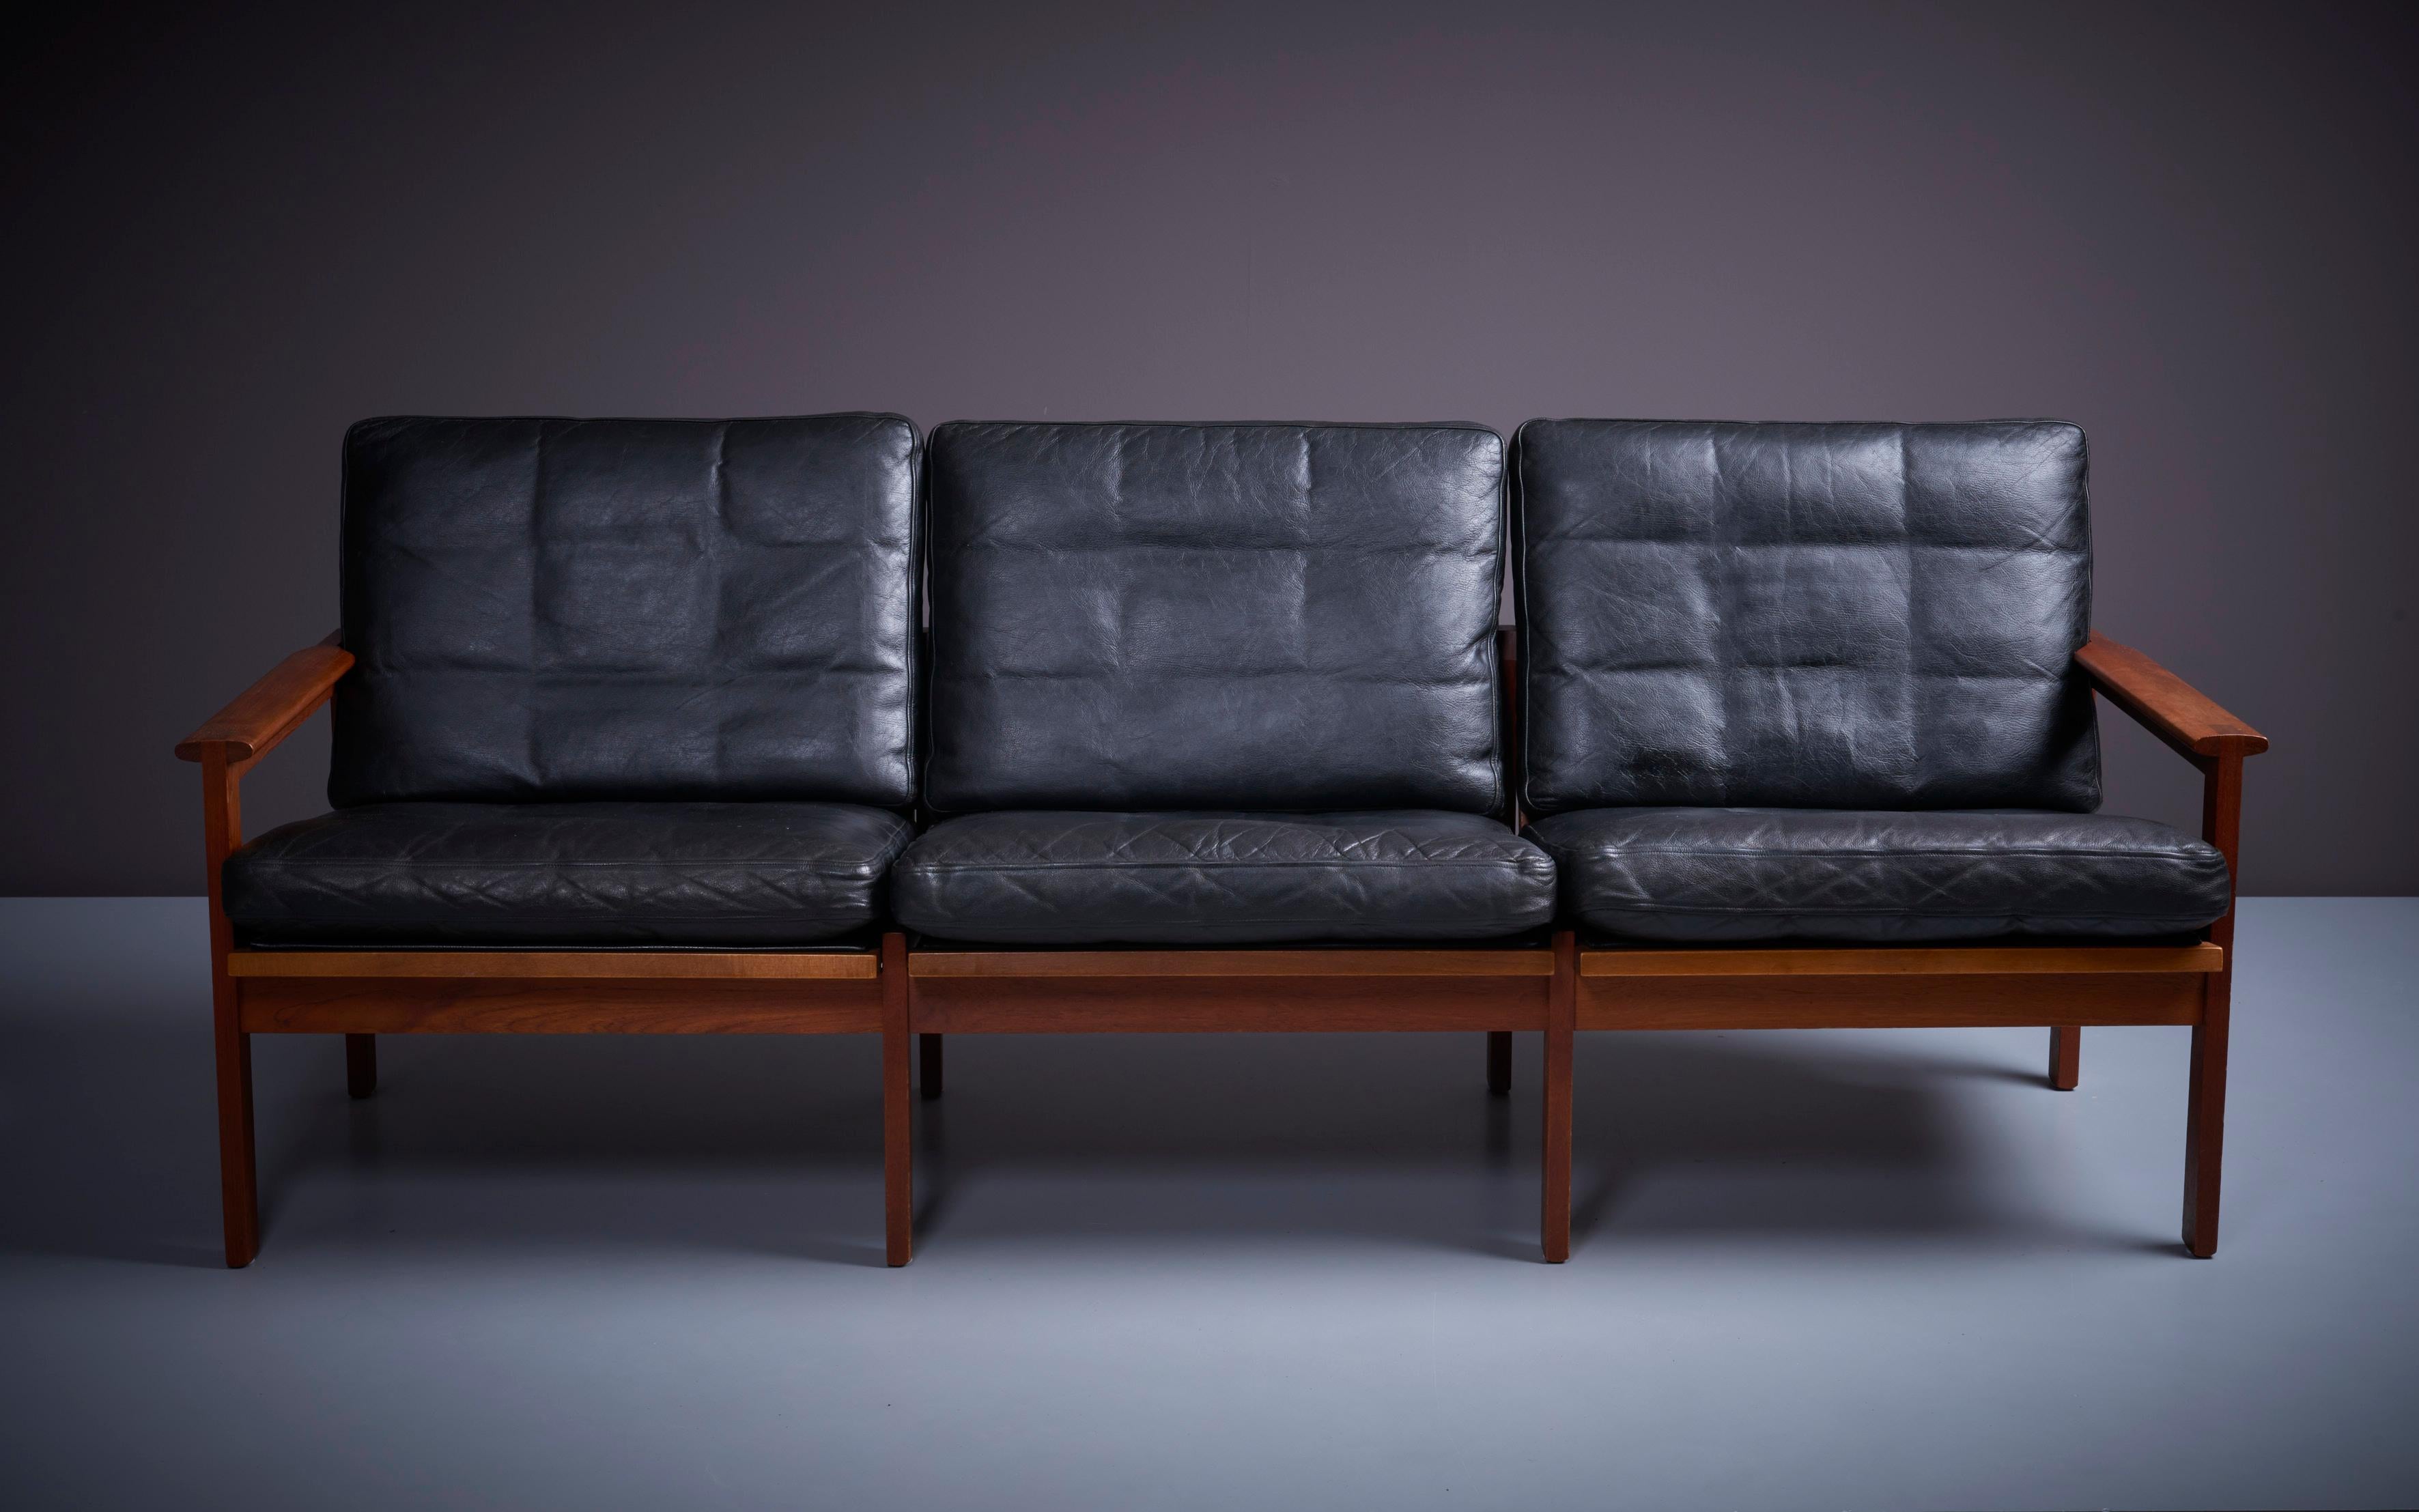 Illum Wikkelso 'Capella' Set of 2x Black Leather Sofa & Side Table Denmark 1960s For Sale 2